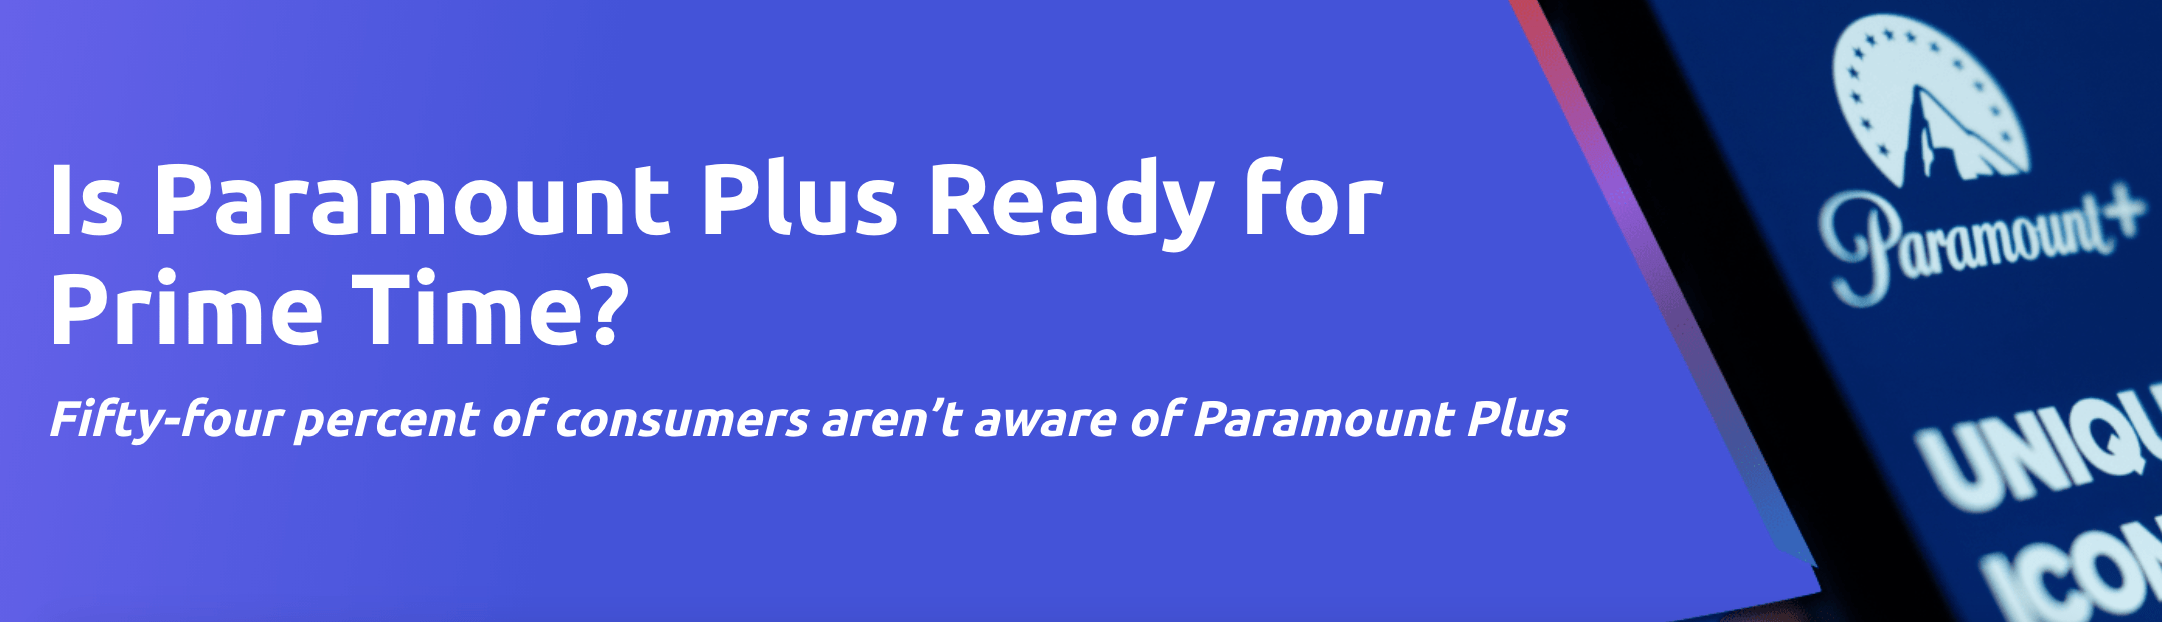 Is Paramount Plus Ready for Prime Time?